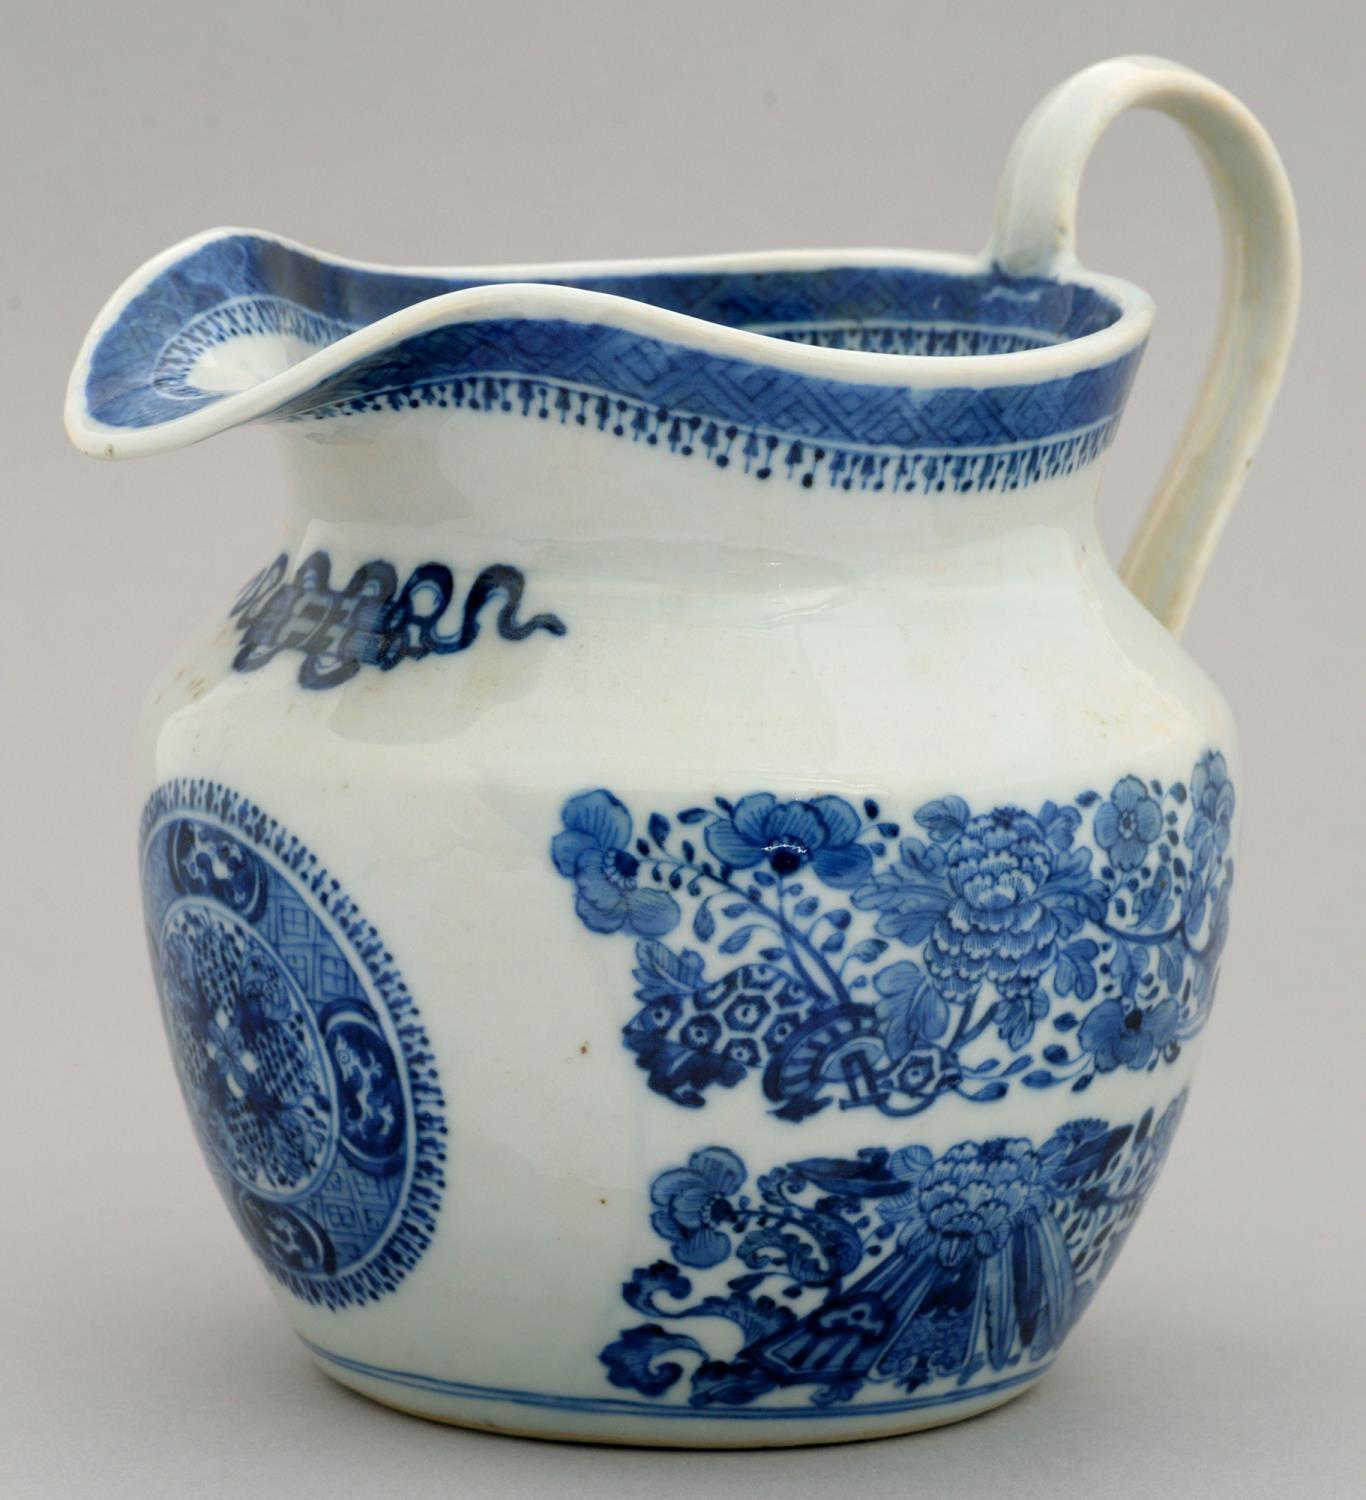 A CHINESE BLUE AND WHITE EXPORT PORCELAIN JUG, EARLY 19TH C  in Fitzhugh pattern, 20cm h Good